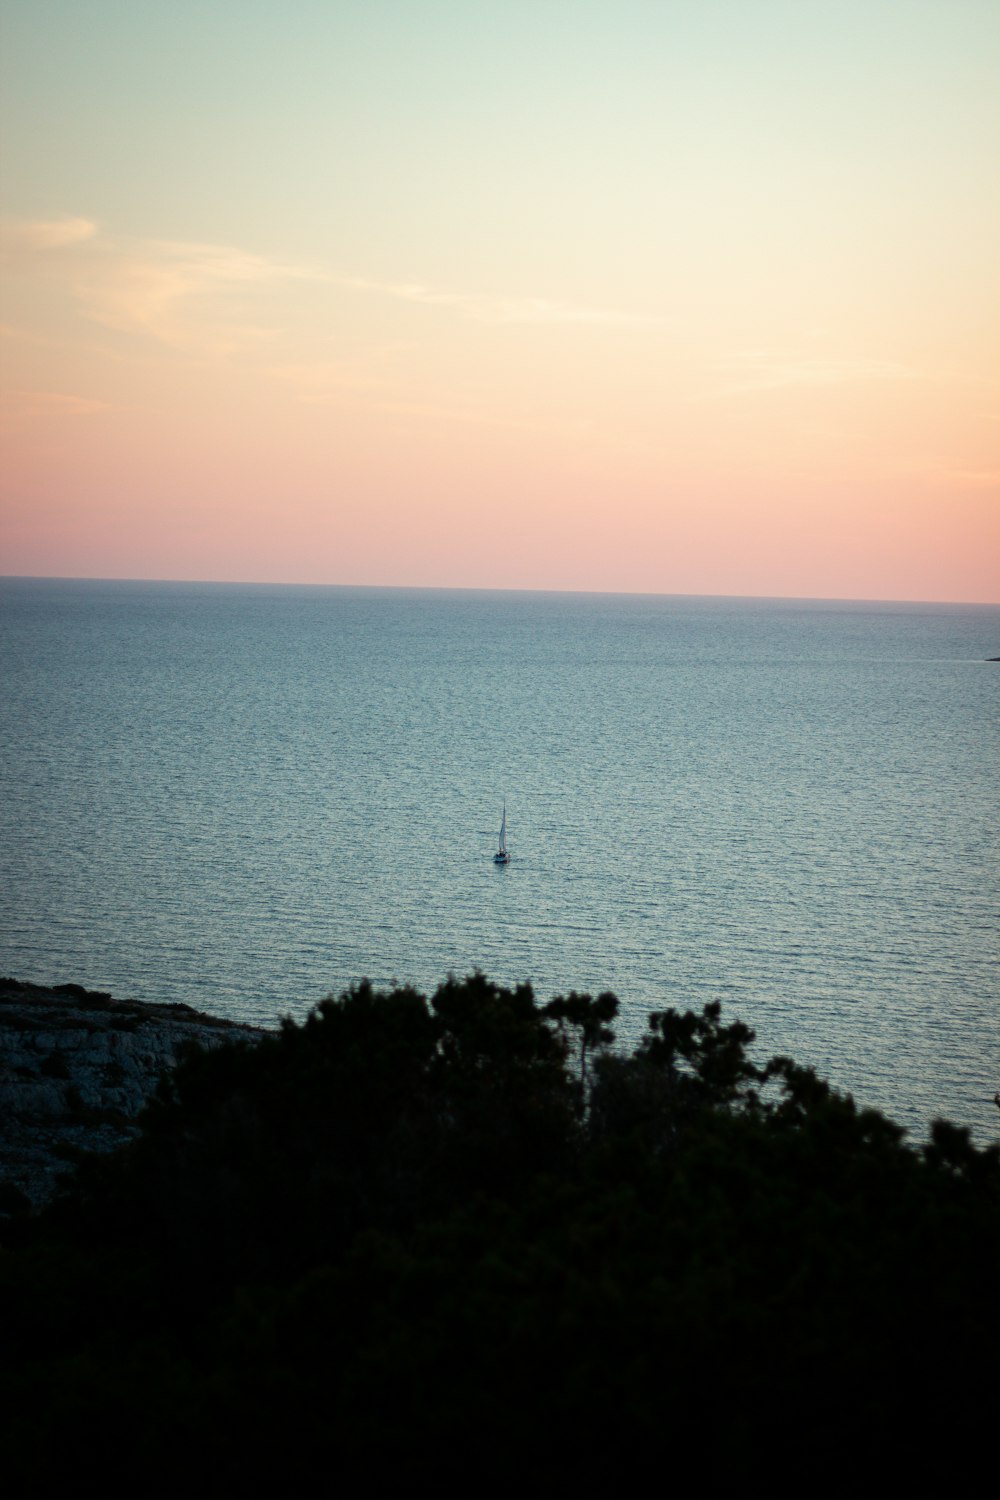 a boat is out in the ocean at sunset